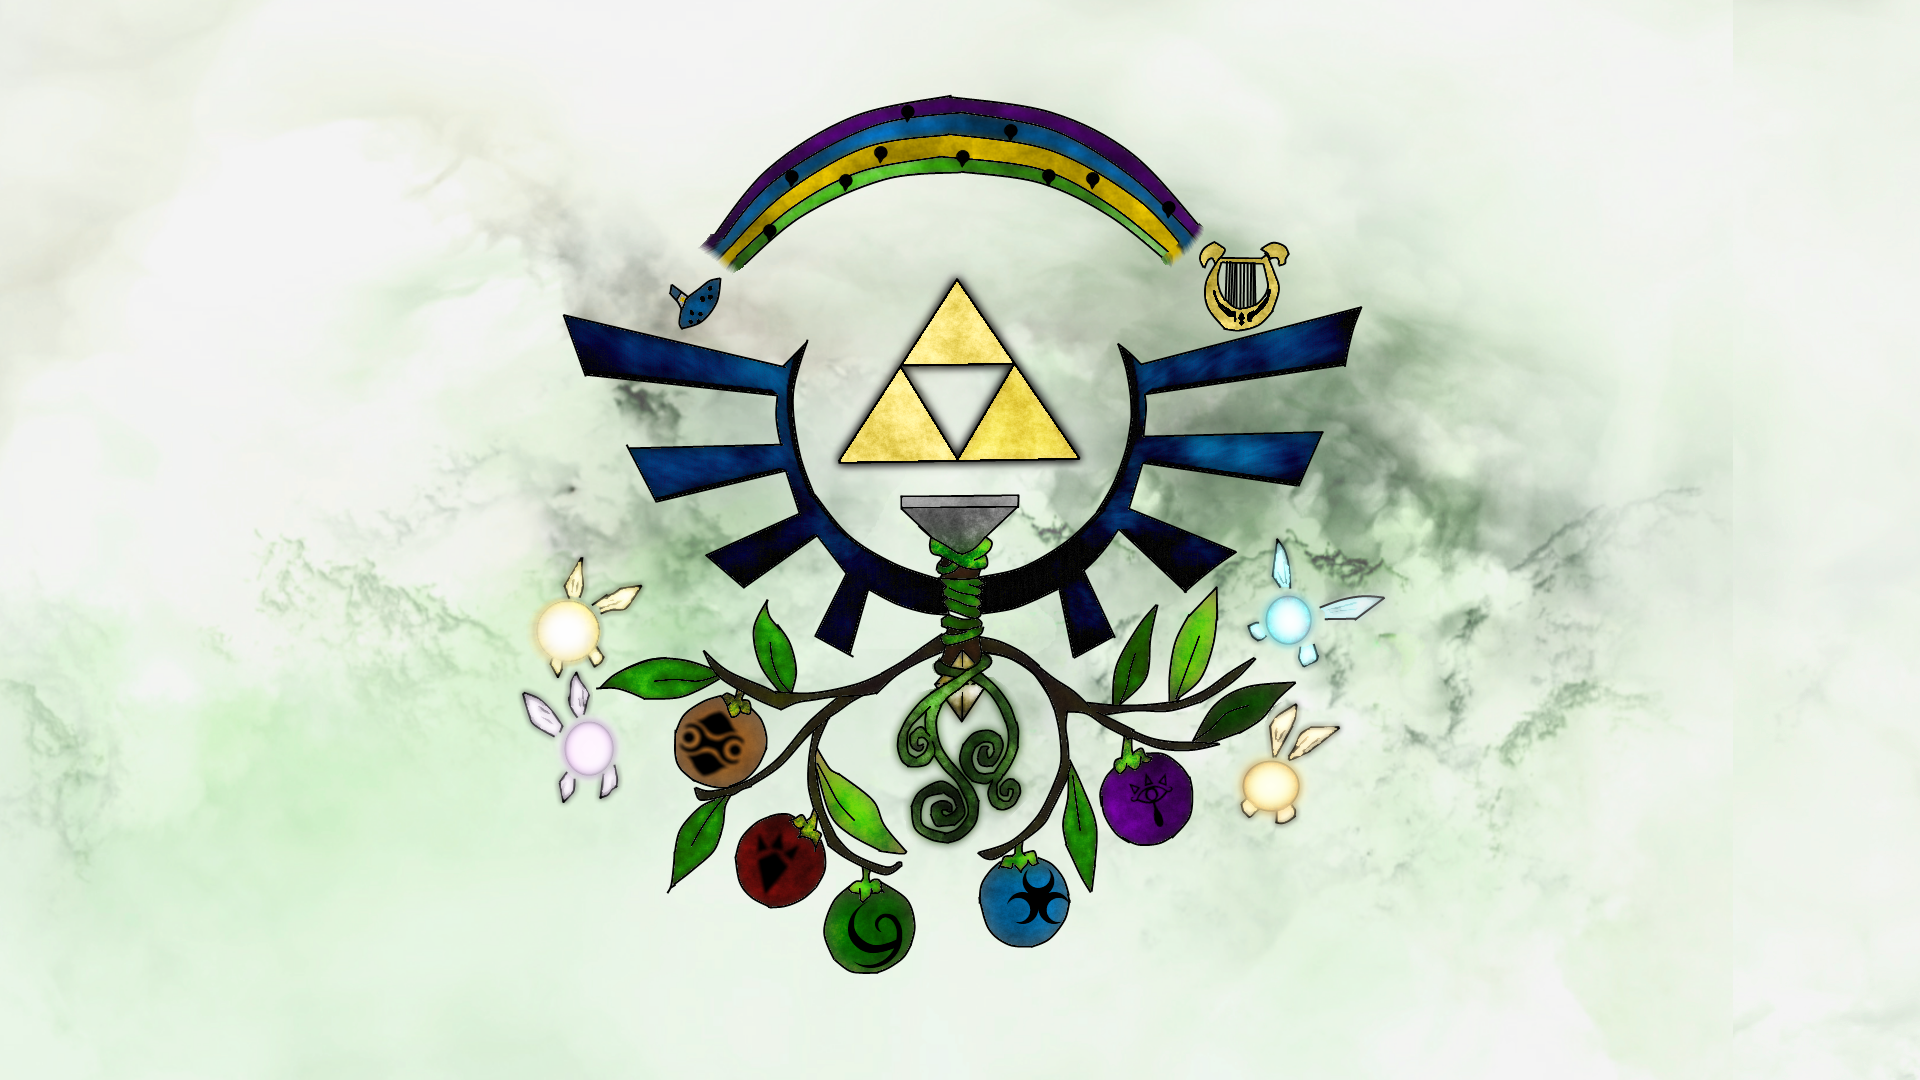 General 1920x1080 The Legend of Zelda video games Triforce video game art simple background white background